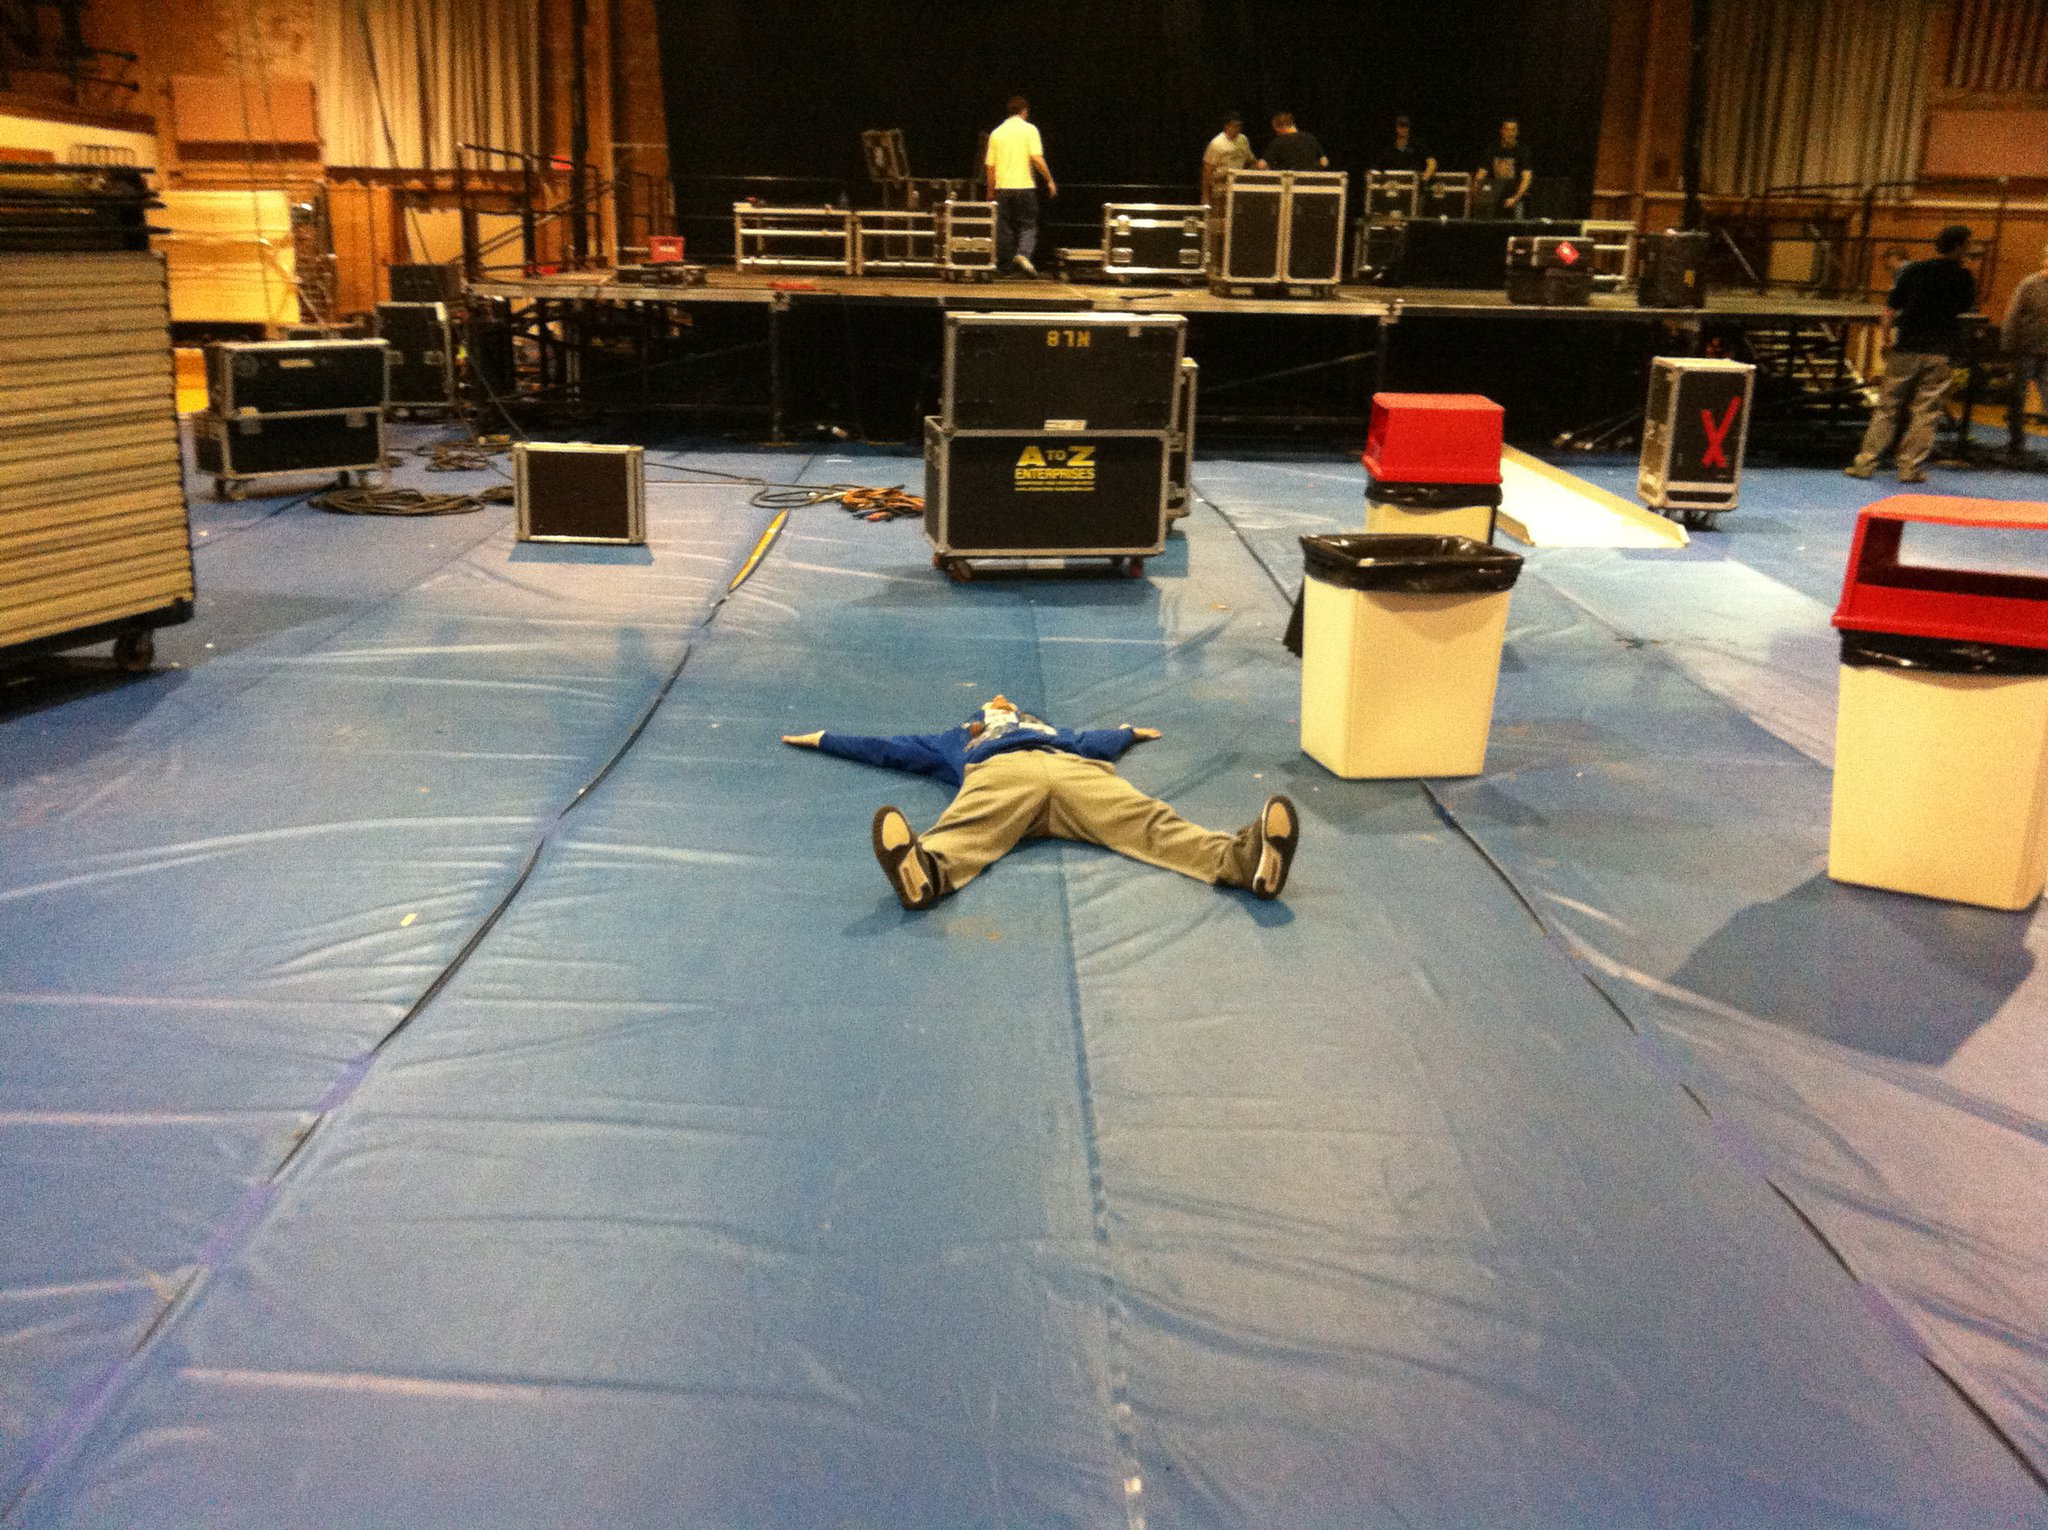 Mike lying in the crater in the floor after a show at UNI 4/21/11
